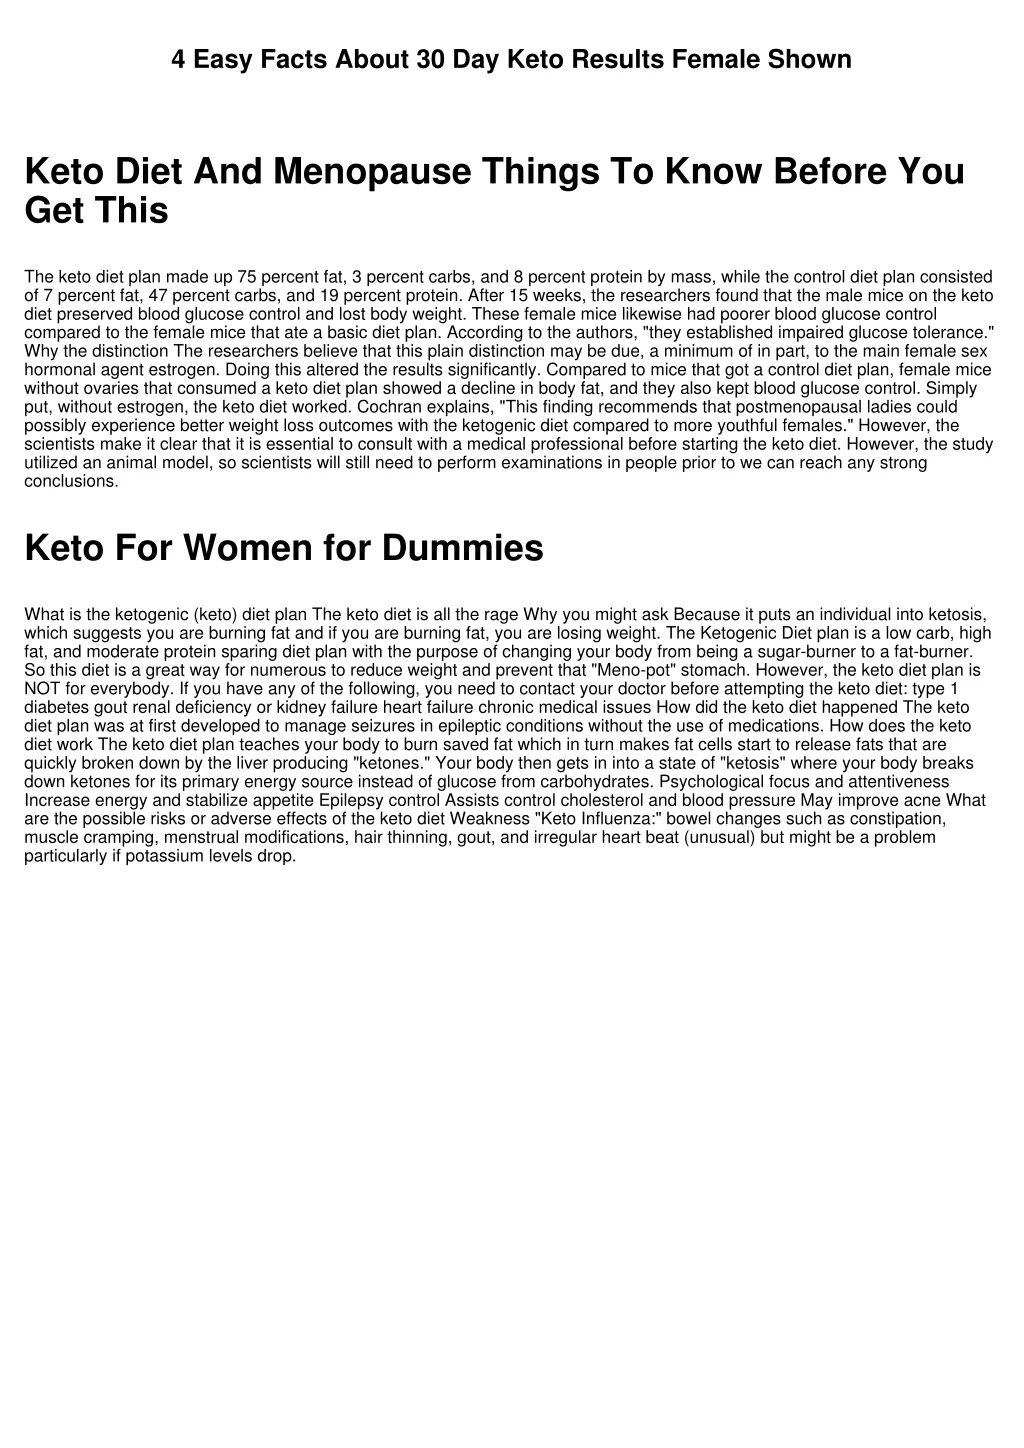 4 easy facts about 30 day keto results female